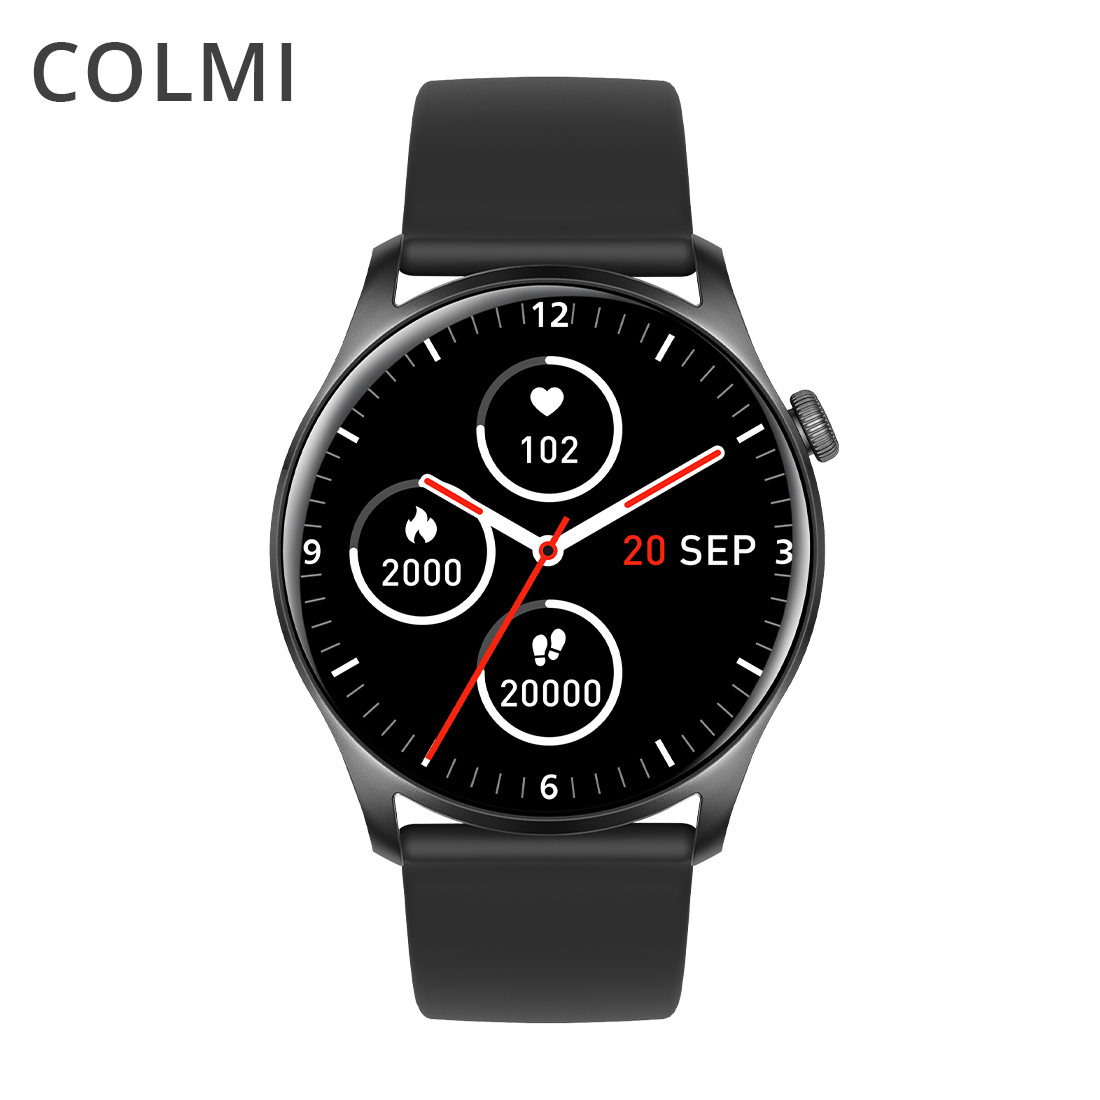 OEM/ODM China Good Budget Smart Watches - COLMI SKY 8 Smart Watch Women IP67 Waterproof Bluetooth Smartwatch Men For Android iOS Phone – Colmi